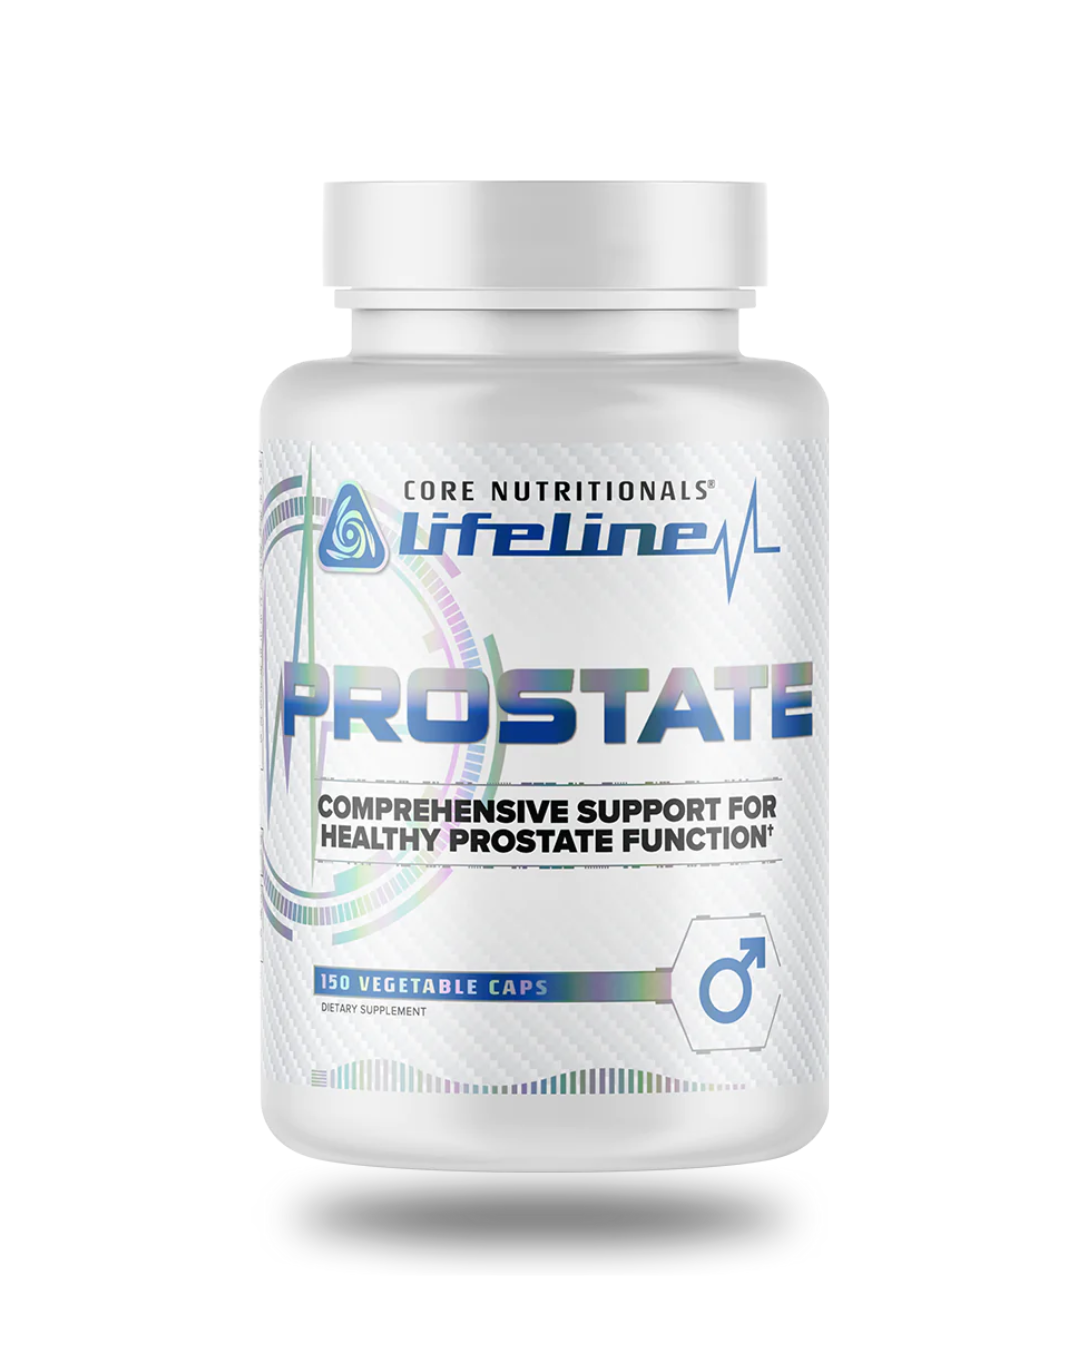 Core Nutritionals | Prostate